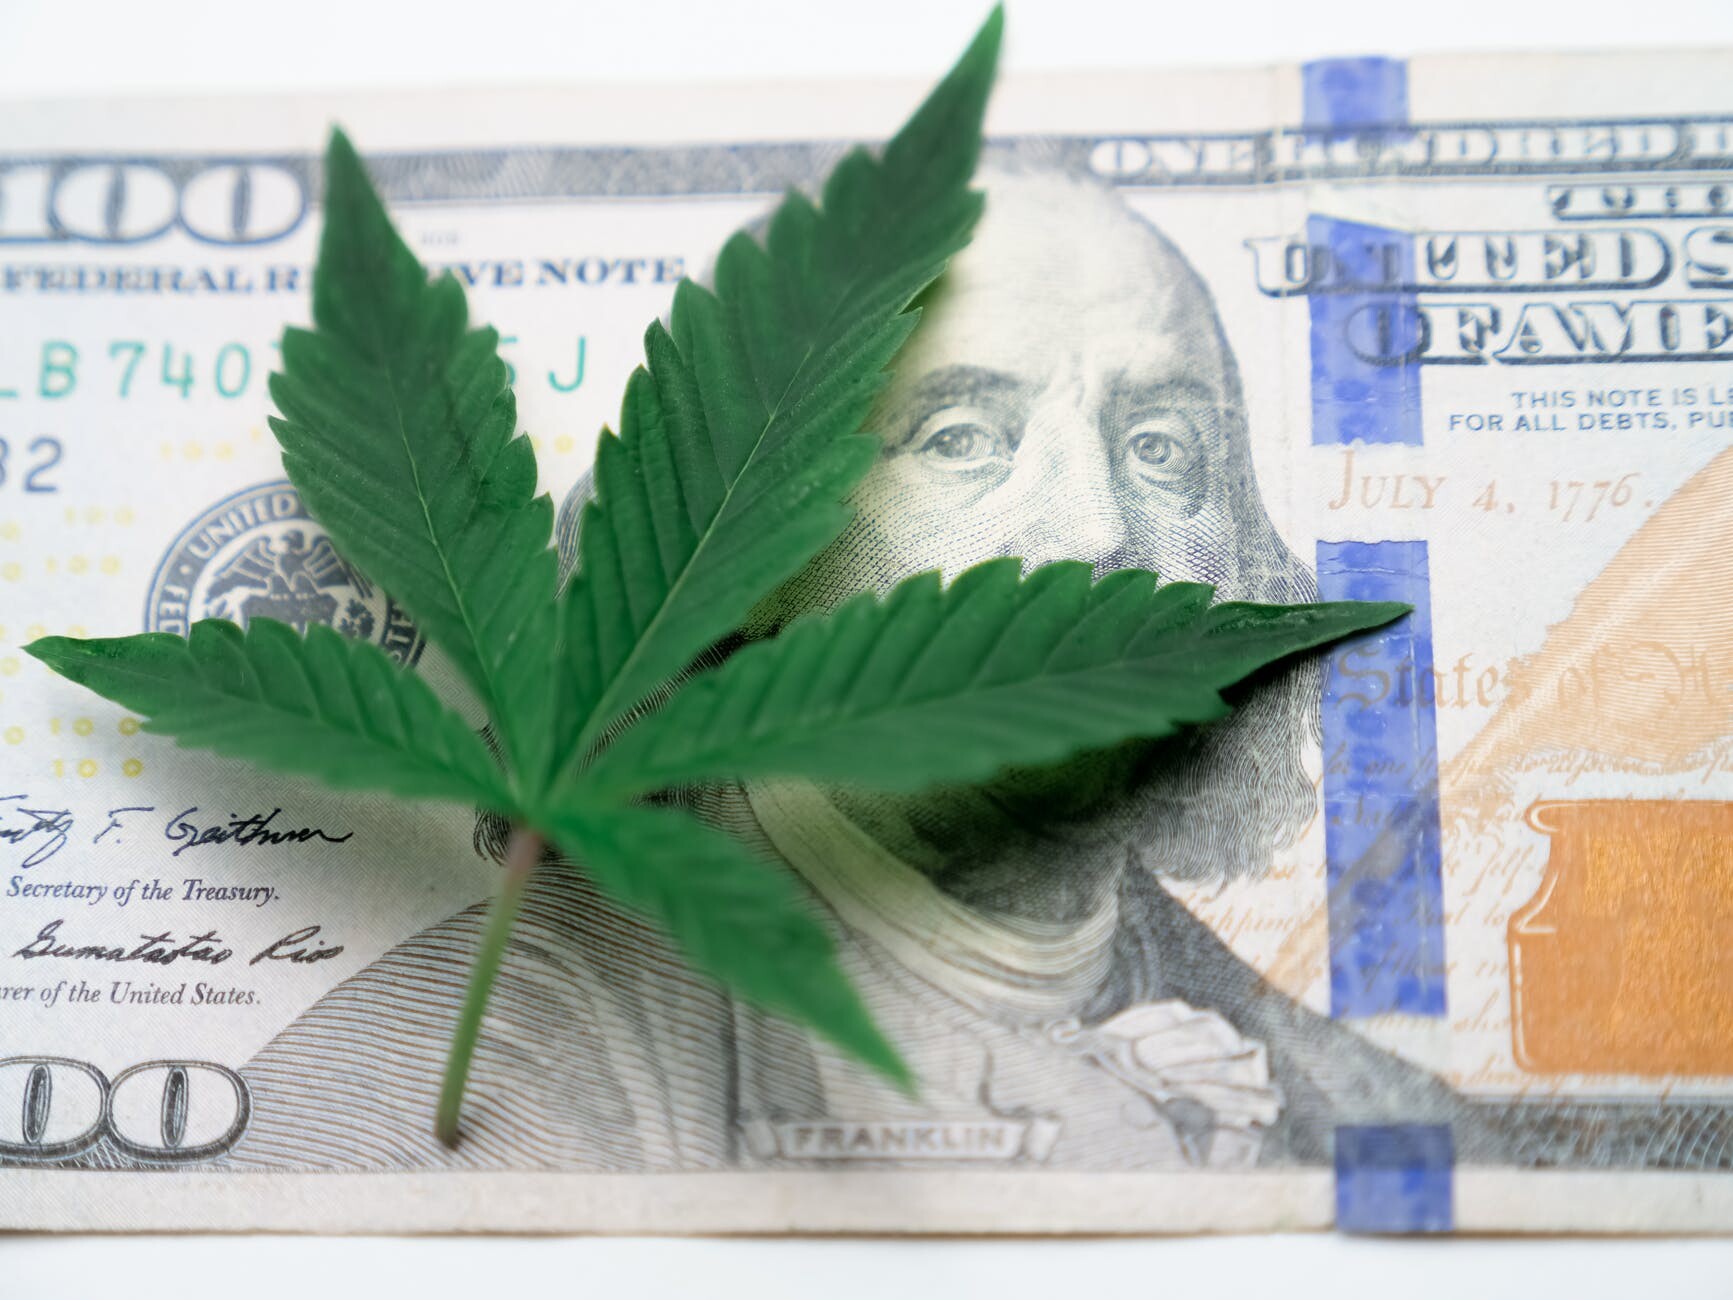 photo of cannabis on top of one hundred dollar bill